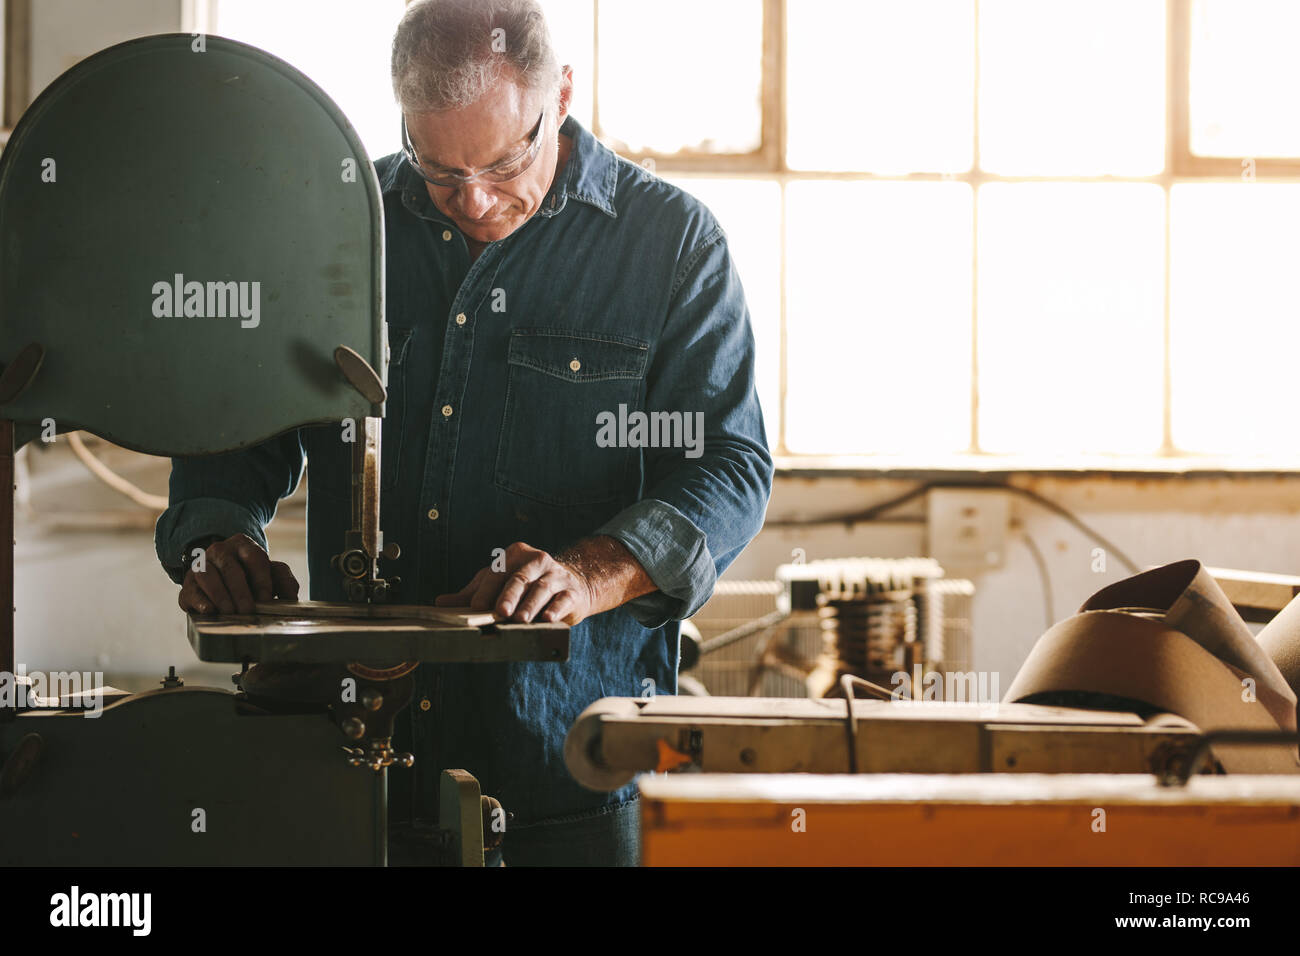 Mature worker in the carpentry workshop cuts the wood using band saw.  Carpenter working in carpentry preparing furniture parts. Stock Photo